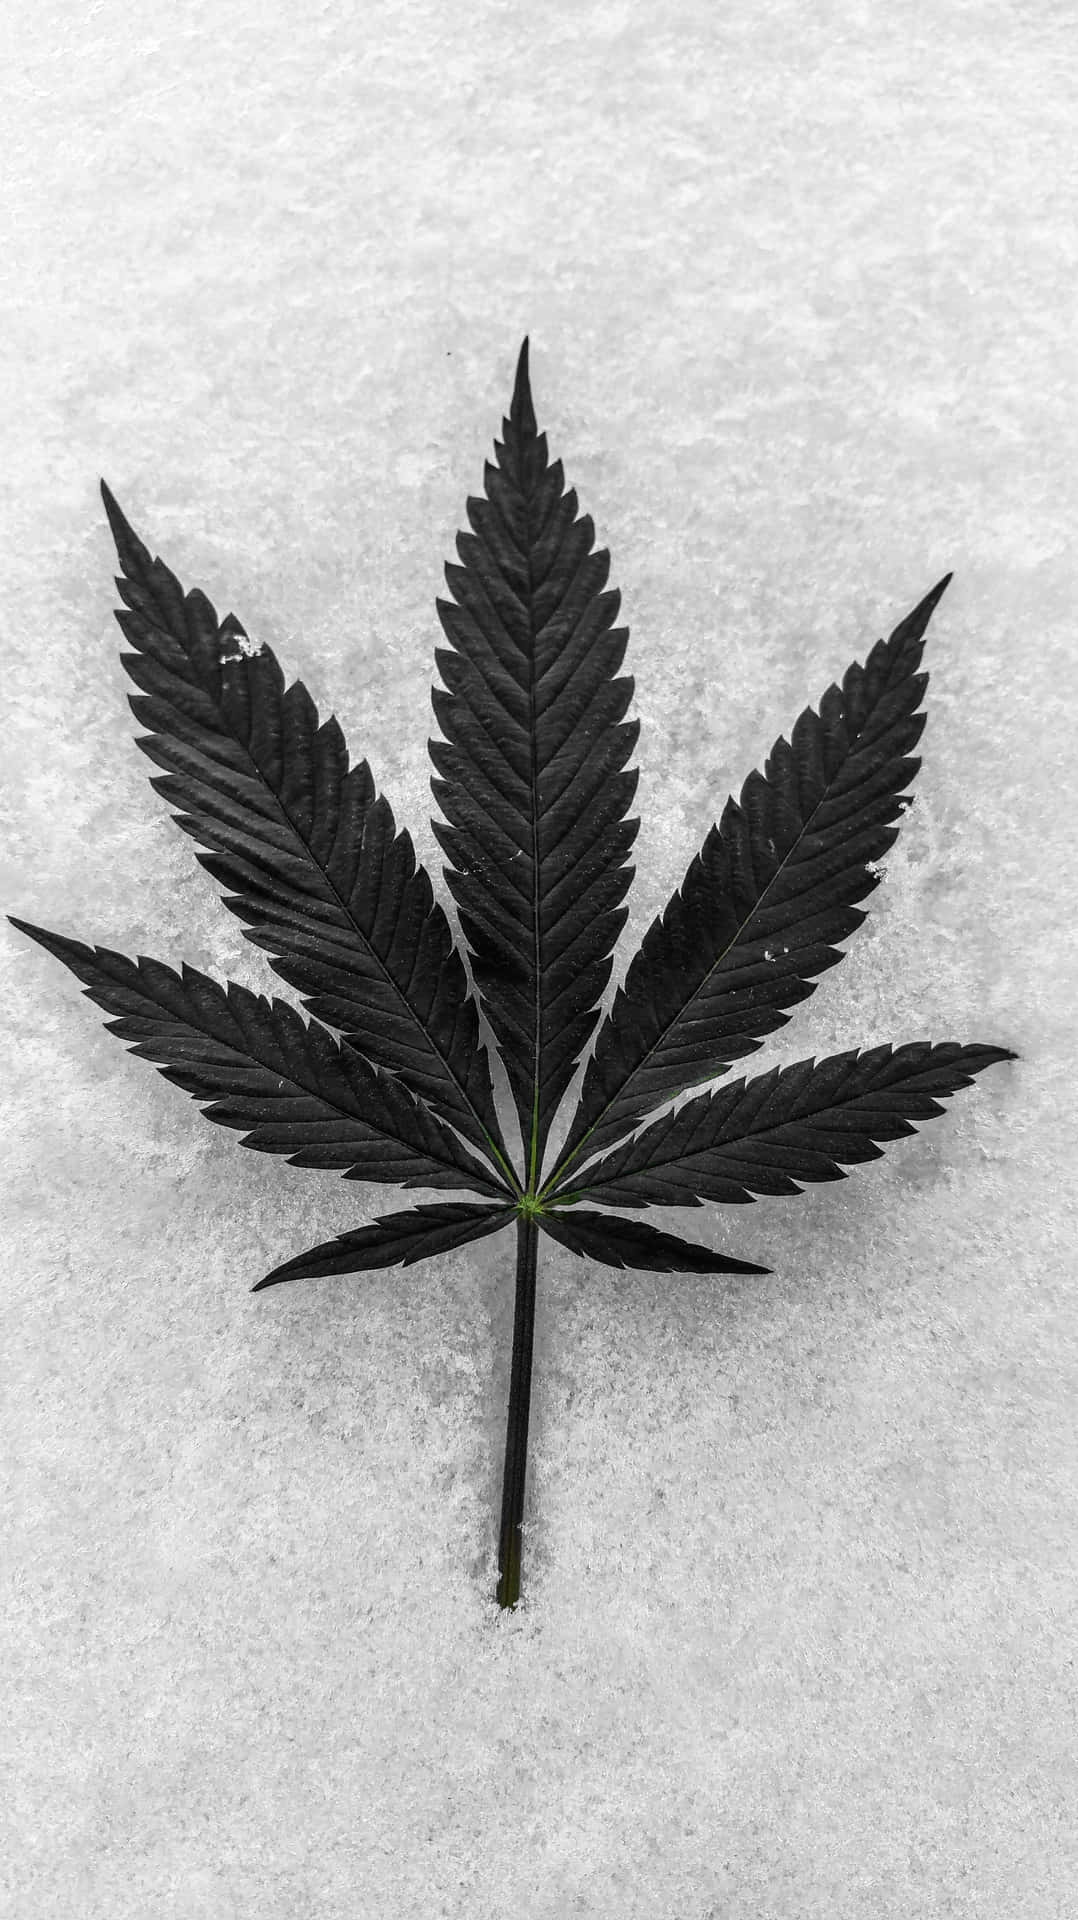 Cannabis Leaf On An Icy Surface Wallpaper